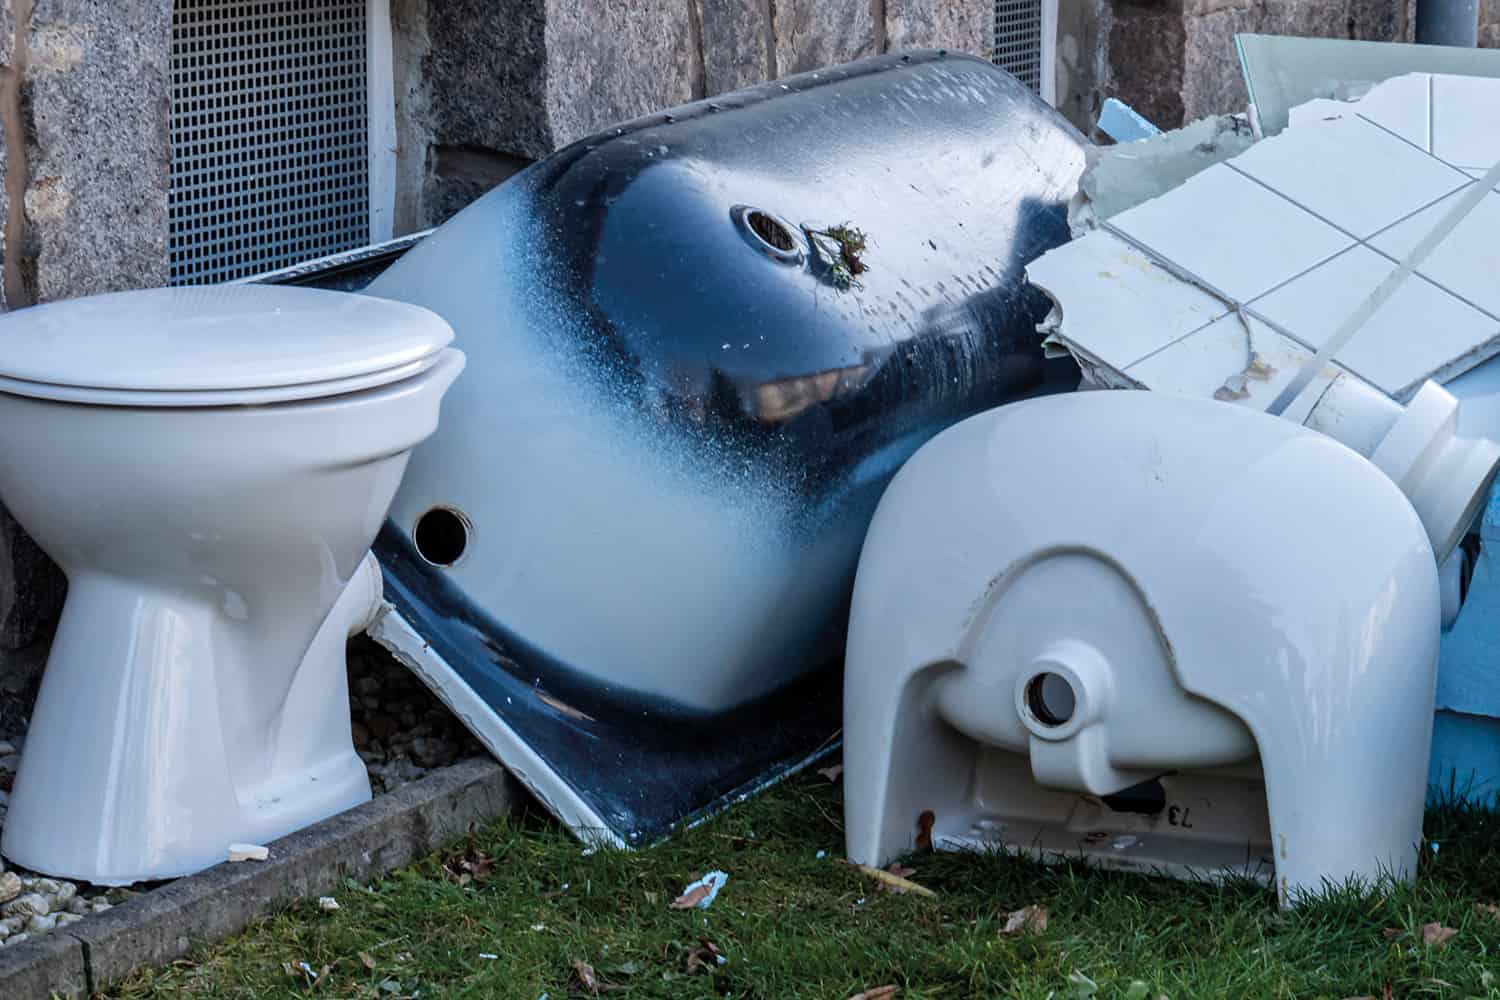 Old bathroom sanitary suites dumped for disposal